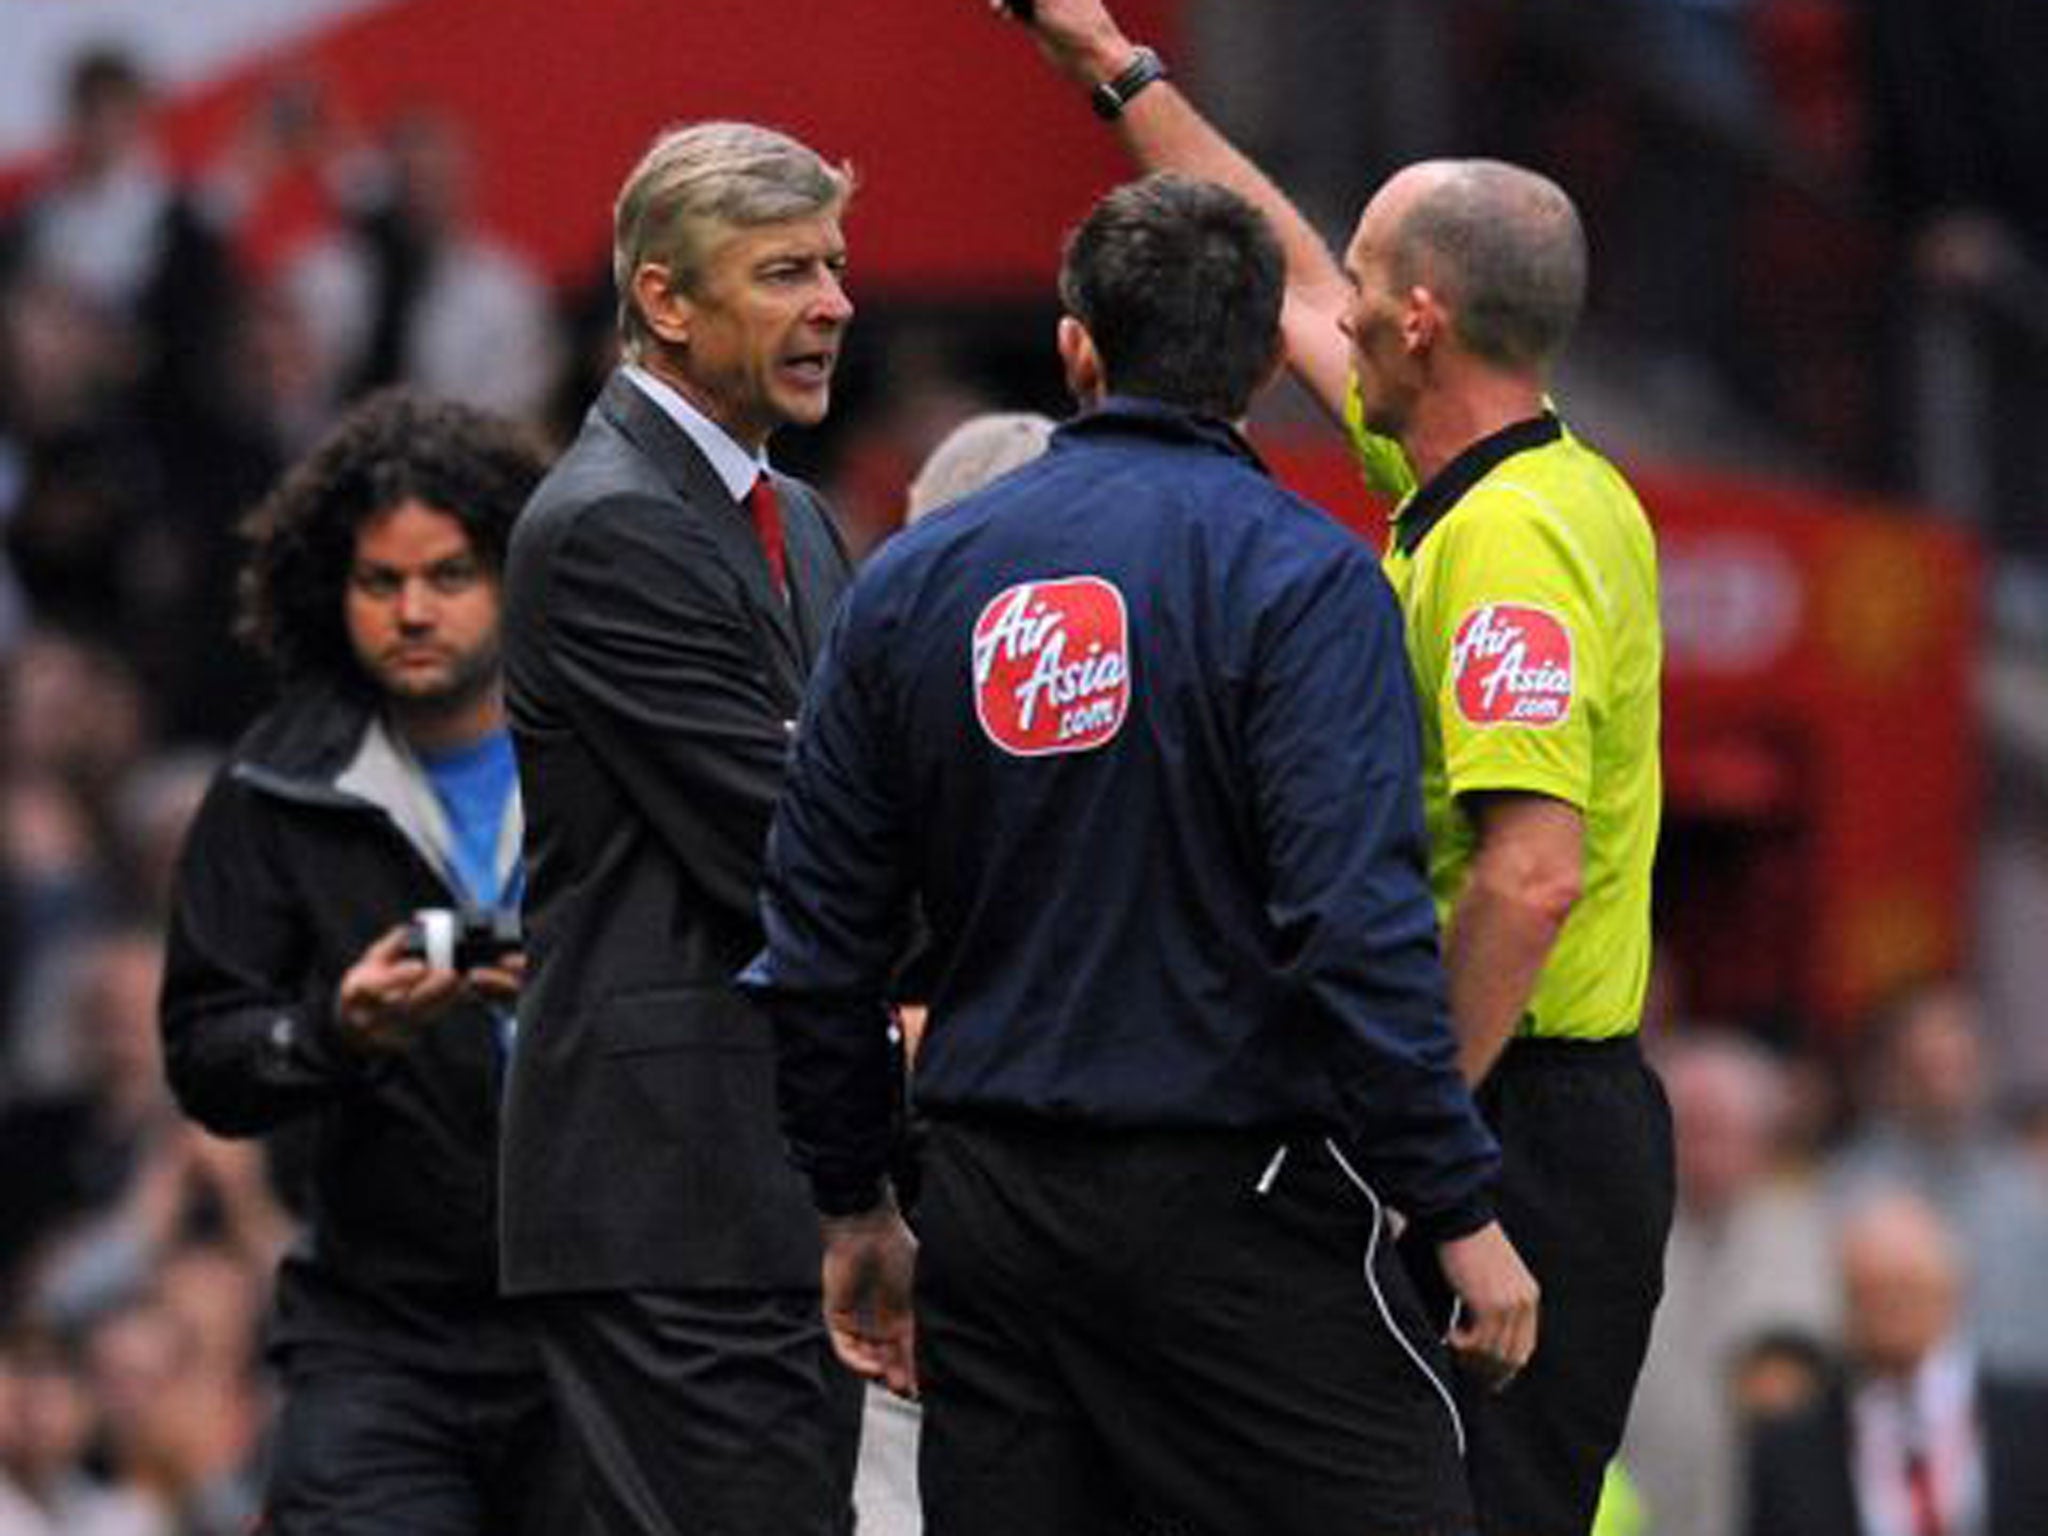 Mike Dean dismisses Wenger in 2-1 loss at Old Trafford in 2009